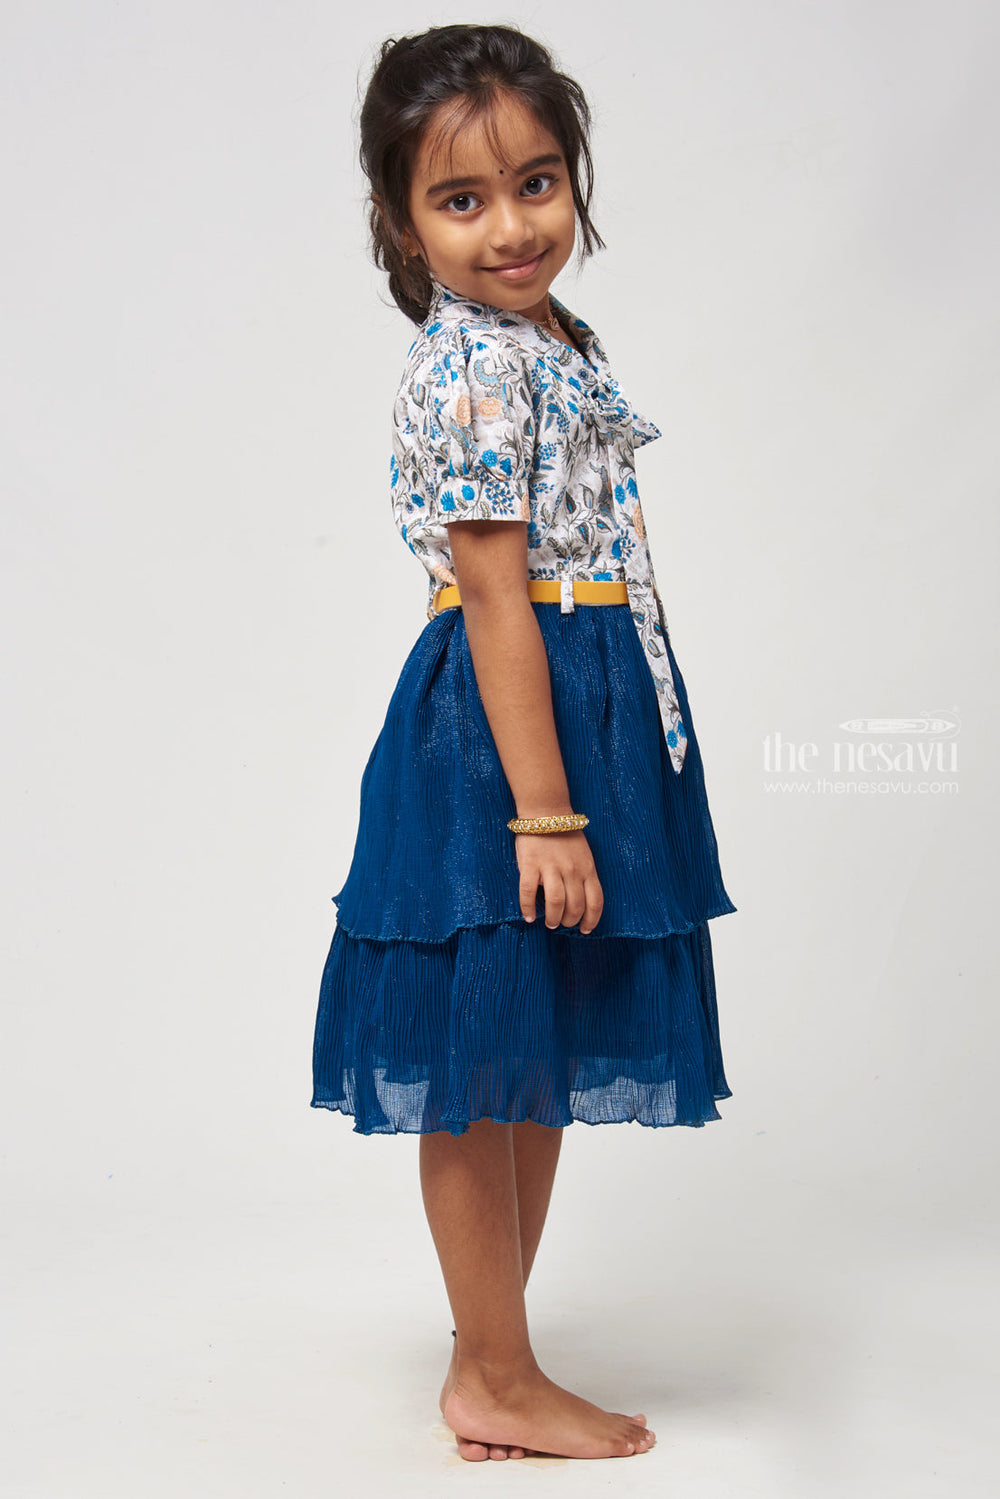 The Nesavu Frocks & Dresses Double Layer Flared Blue Frock - Floral Tie Neck Design Nesavu Floral Printed Fancy Frock | Latest Frocks for Girls | The Nesavu Elevate your childs wardrobe with our Floral Printed Tie Neck with Double Layer Flared Blue Frock. The floral print adds elegance, while the sleeveless design ensures comfort. The tie neck detail adds a stylish touch, and the double layer flared skirt creates a graceful look.